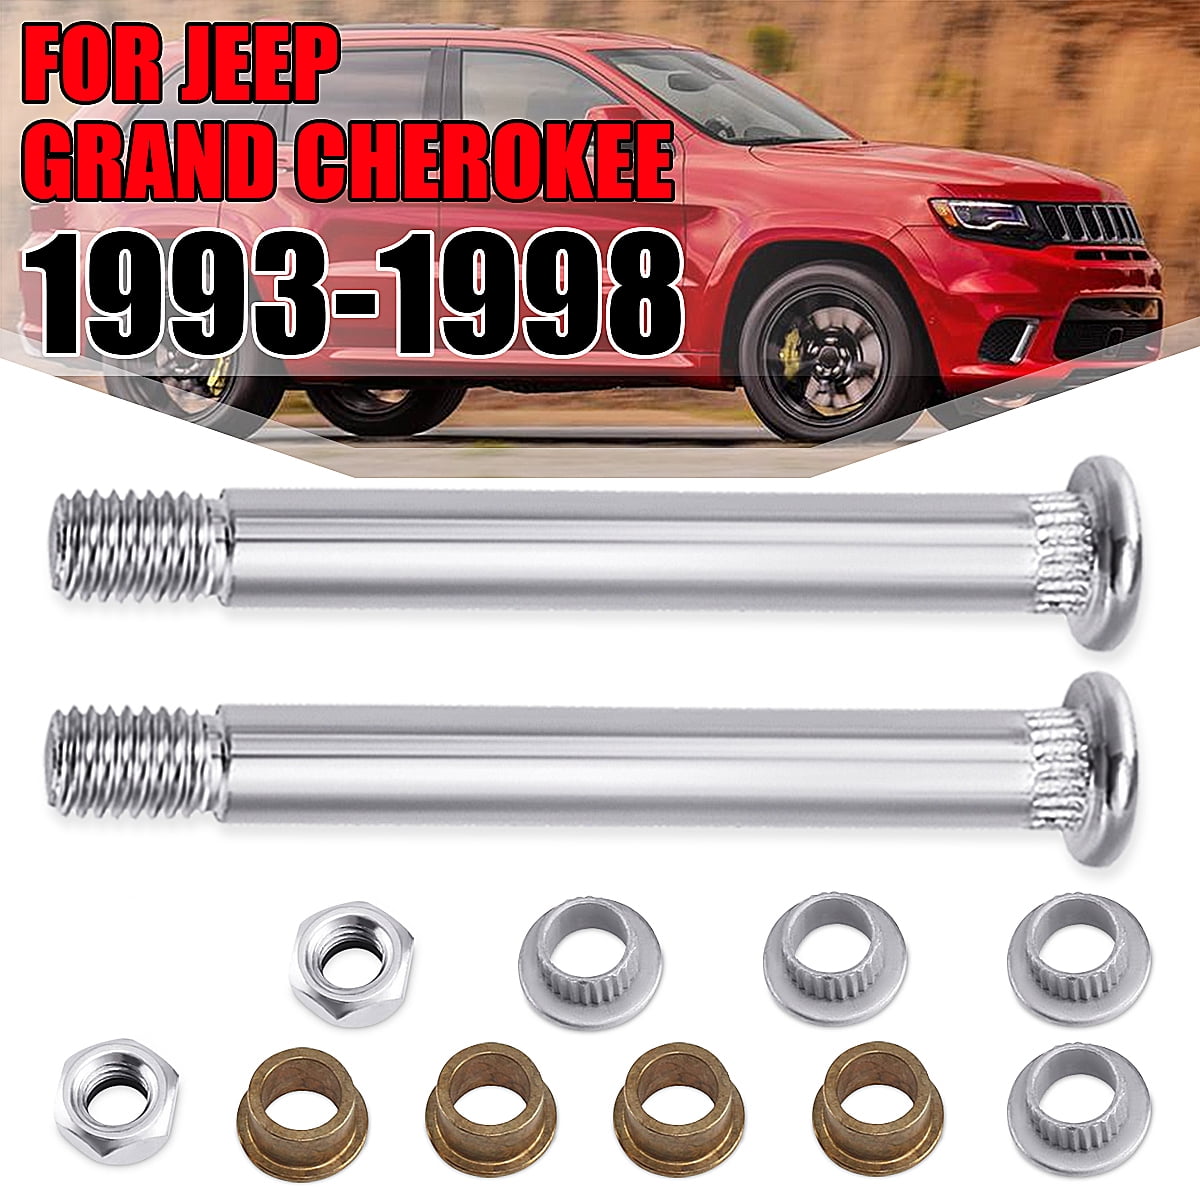 Size 1/2-20 Stainless Capped fits Jeep Grand Cherokee ZJ 1993-1998 Jeep Stainless Steel Lug Nut SINGLE 